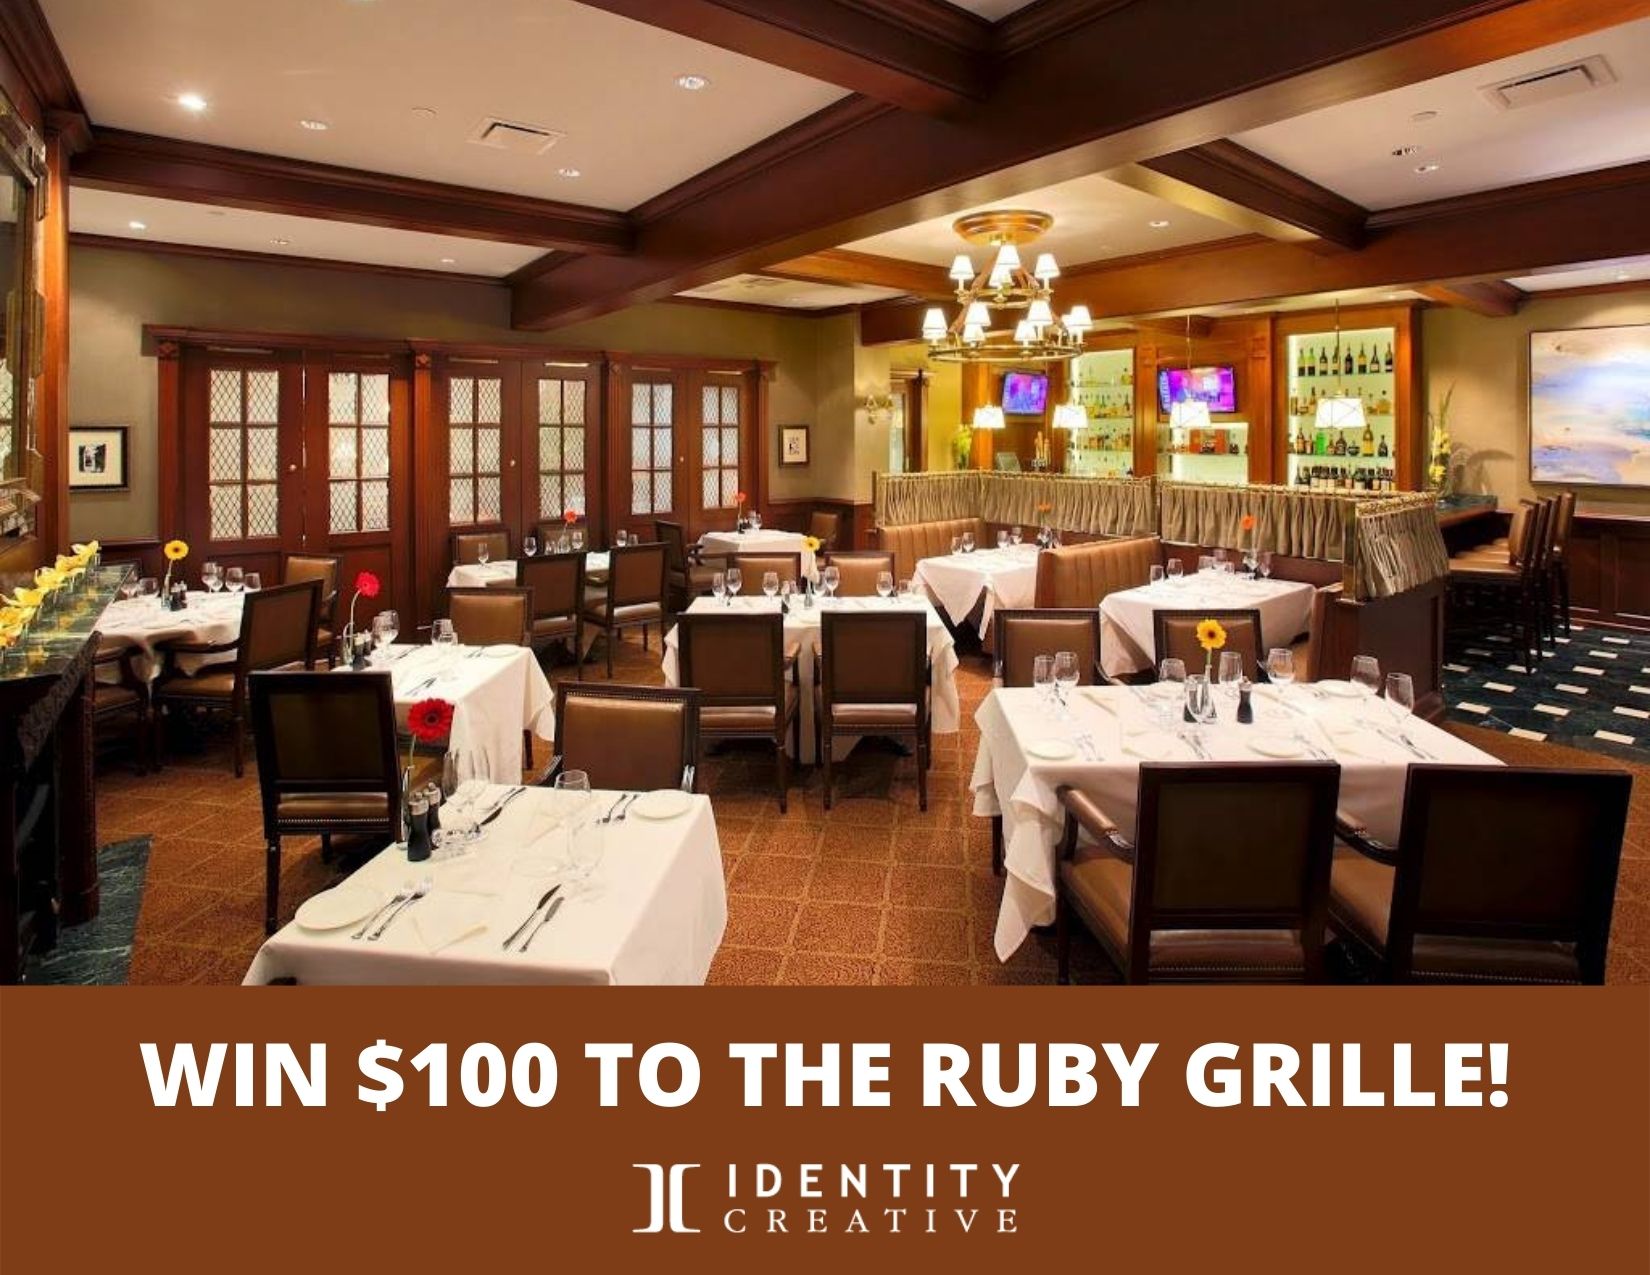 Win $100 to the Rugby Grille!